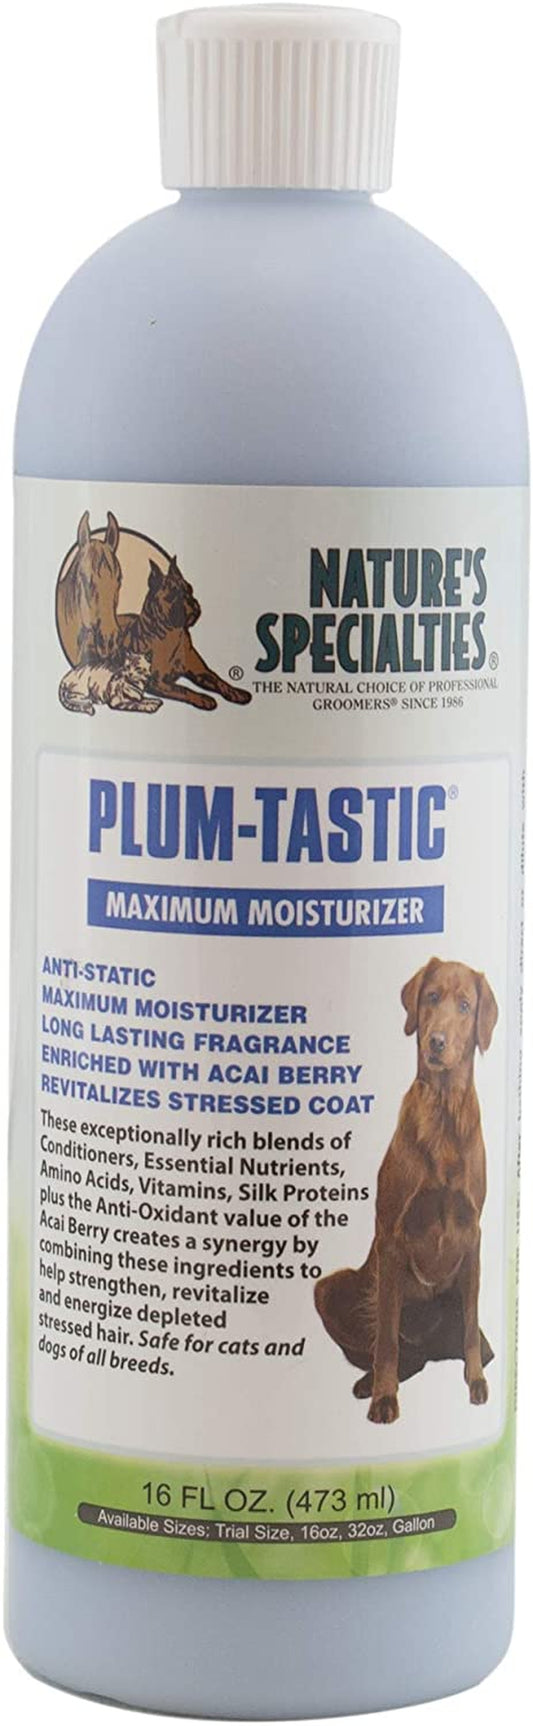 Nature'S Specialties Plum-Tastic Ultra Concentrated Dog Conditioner for Pets, Makes up to 4 Gallons, Natural Choice for Professional Groomers, Maximum Moisture, Made in USA, 16 Oz